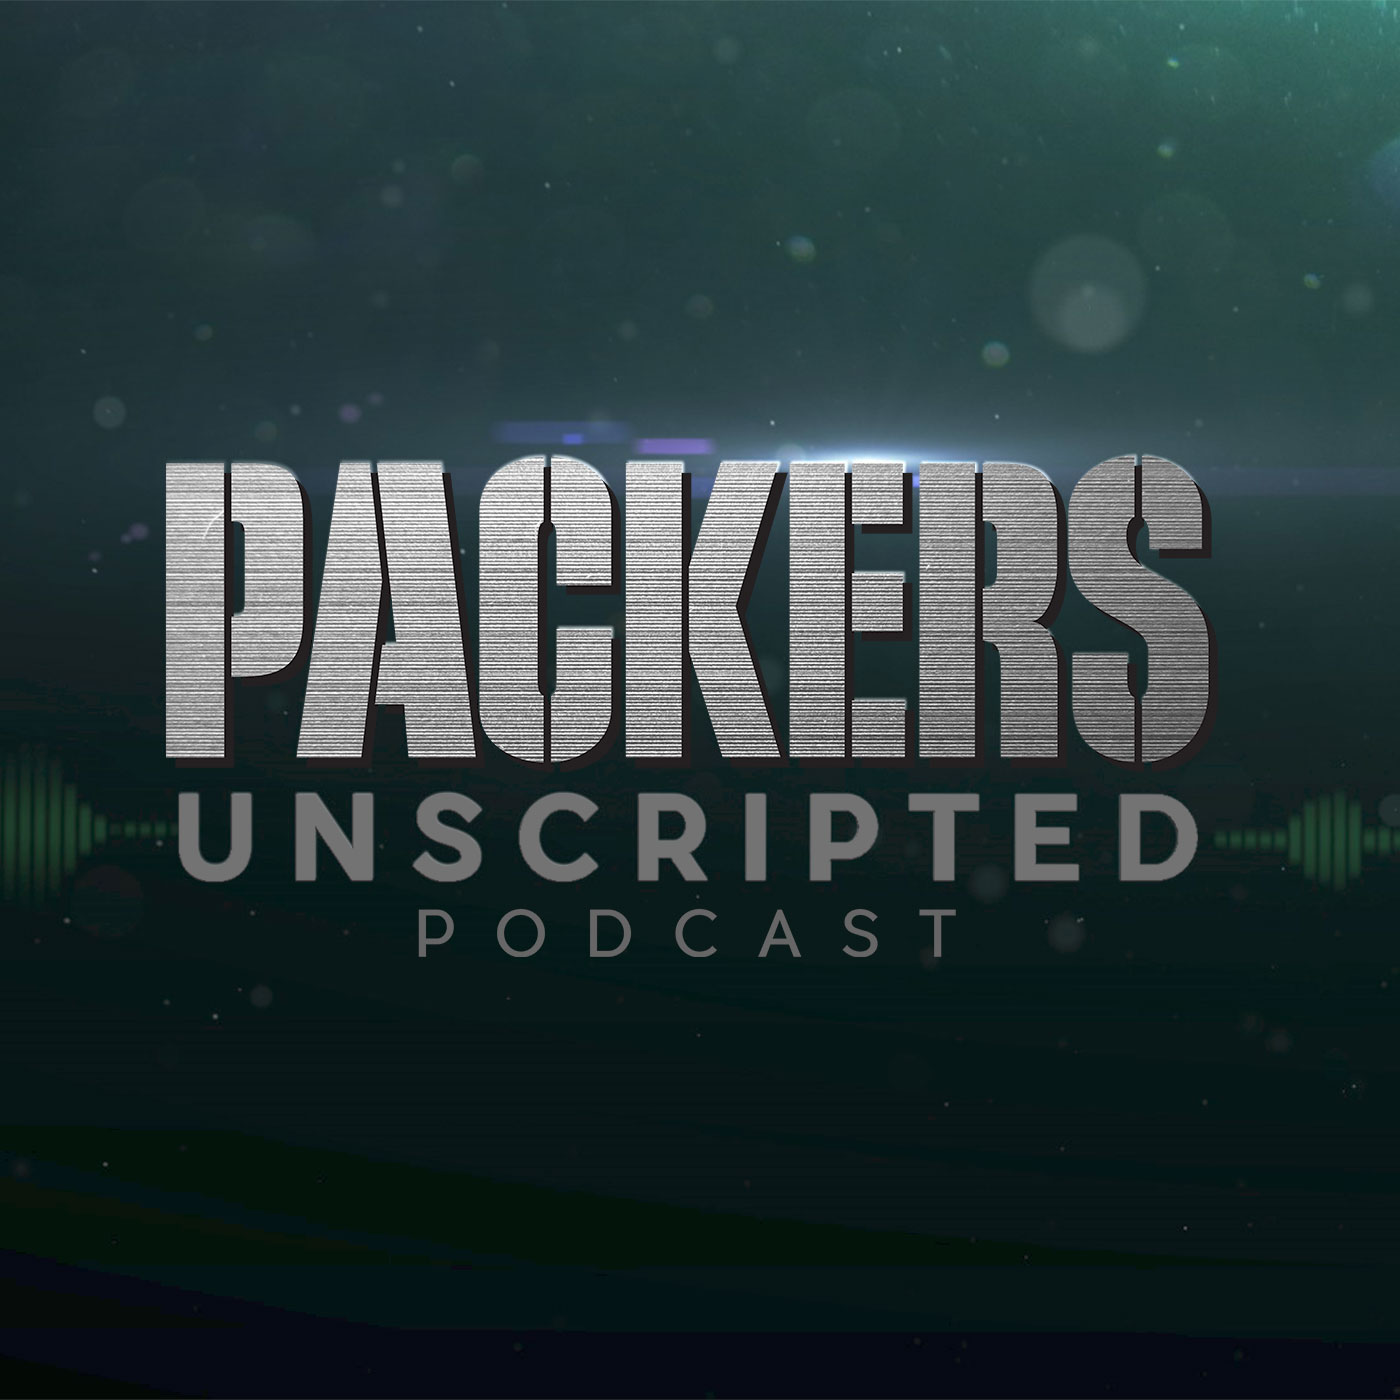 #640 Packers Unscripted: Rivalry rematch